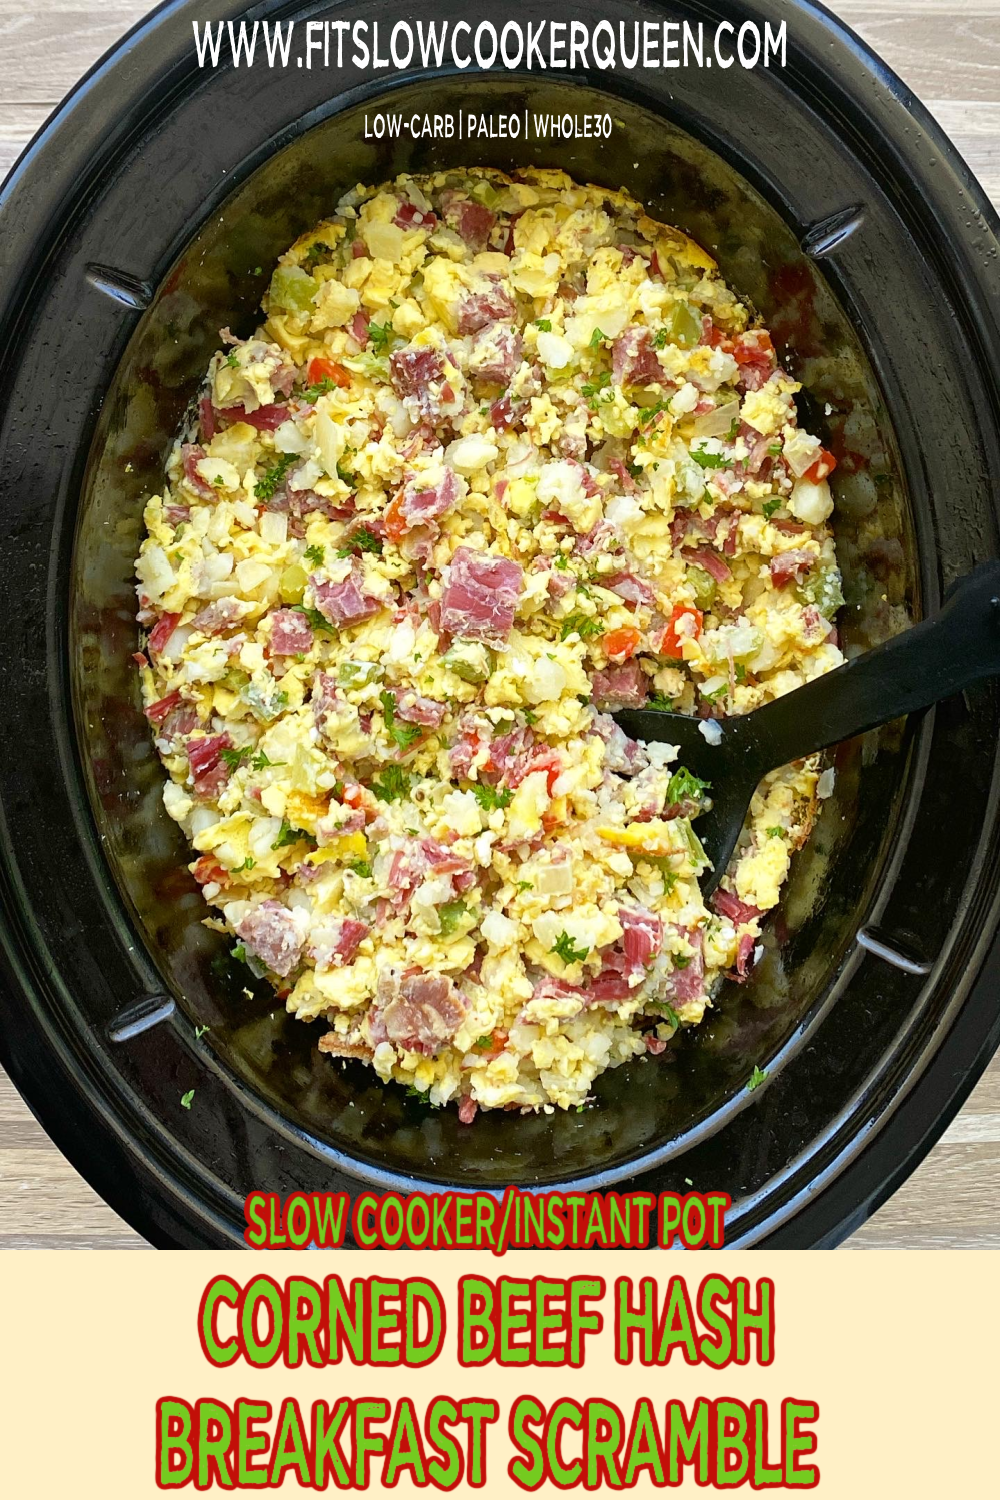 Slow Cooker_Instant Pot Corned Beef Hash Breakfast Scramble (Low-Carb, Paleo, Whole30)